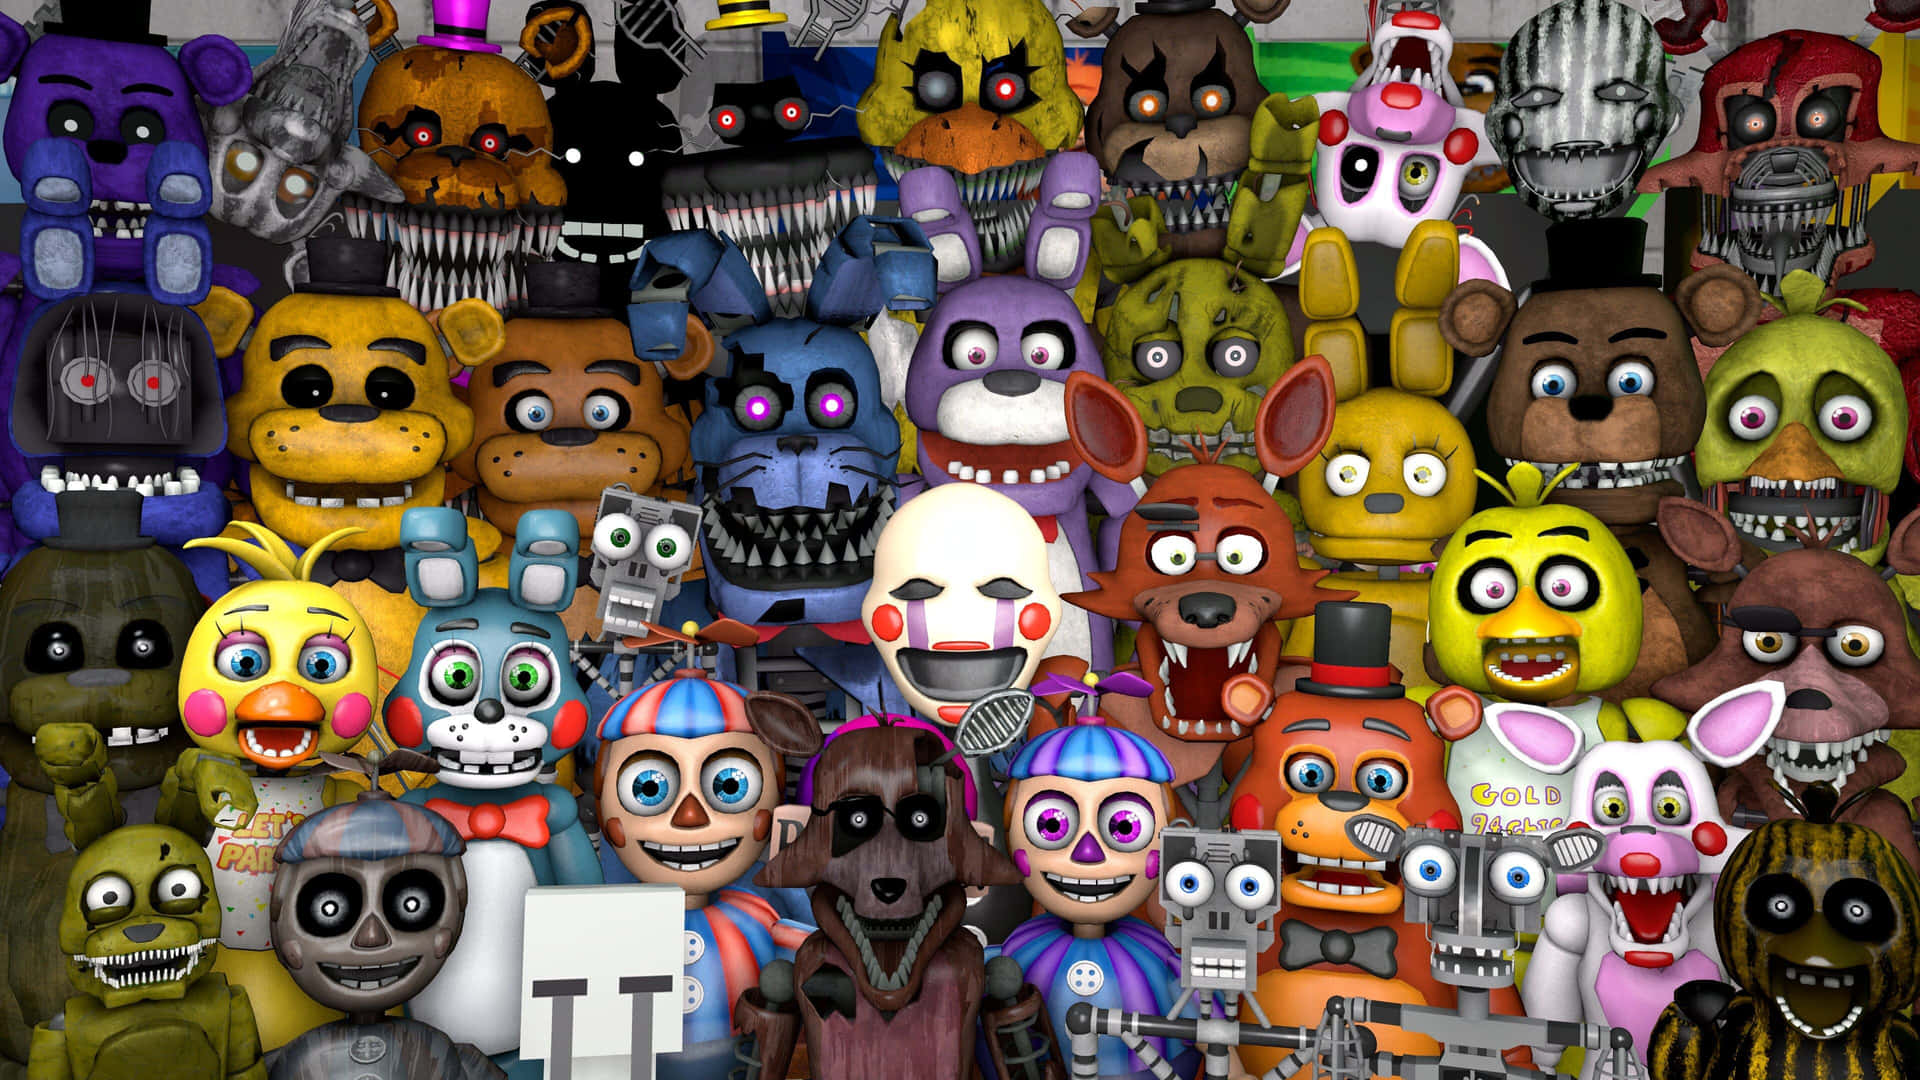 Advanced Animatronic Characters Performing on Stage Wallpaper